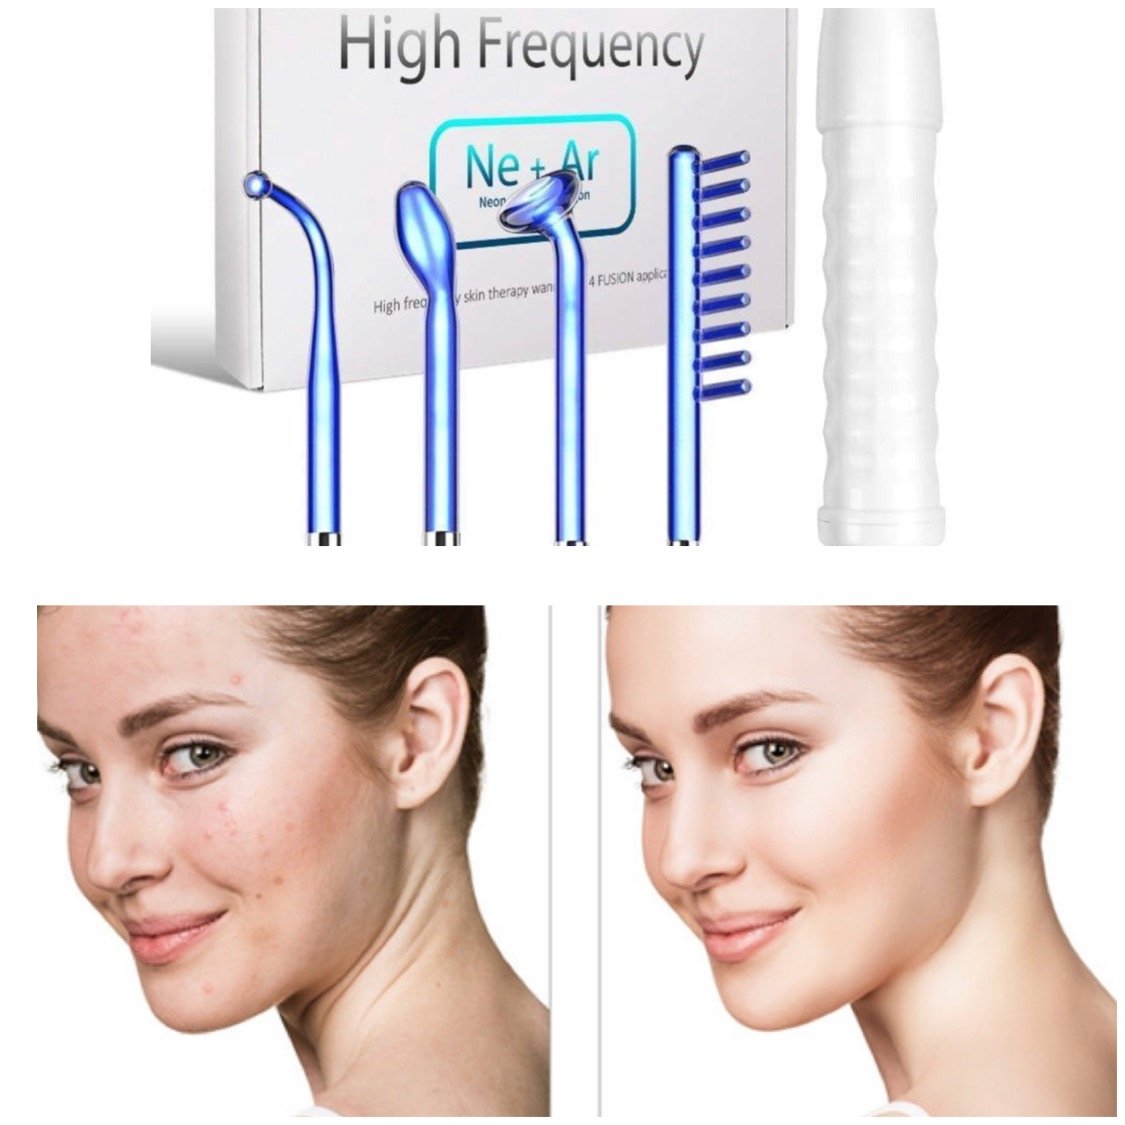 You Love We Ship Health & Beauty Fusion Therapy Kit Fusion High Frequency Facial Therapy Goodbye Acne, Wrinkles, Hair Loss & Cellulite.